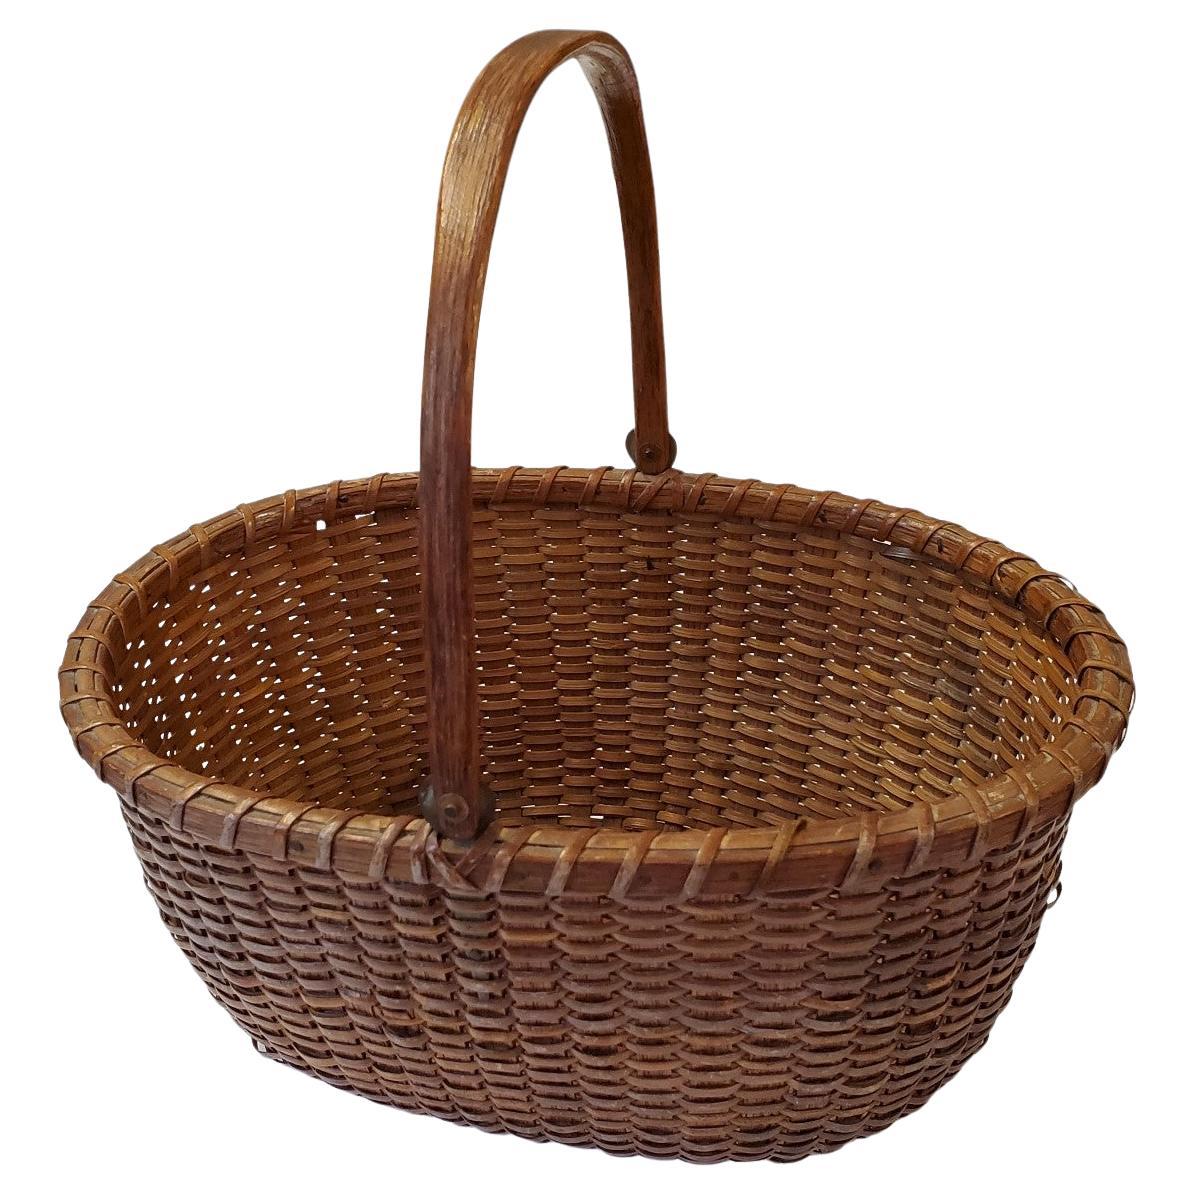 Nantucket Basket by A.D. Williams (1867 - 1927), circa 1890 For Sale